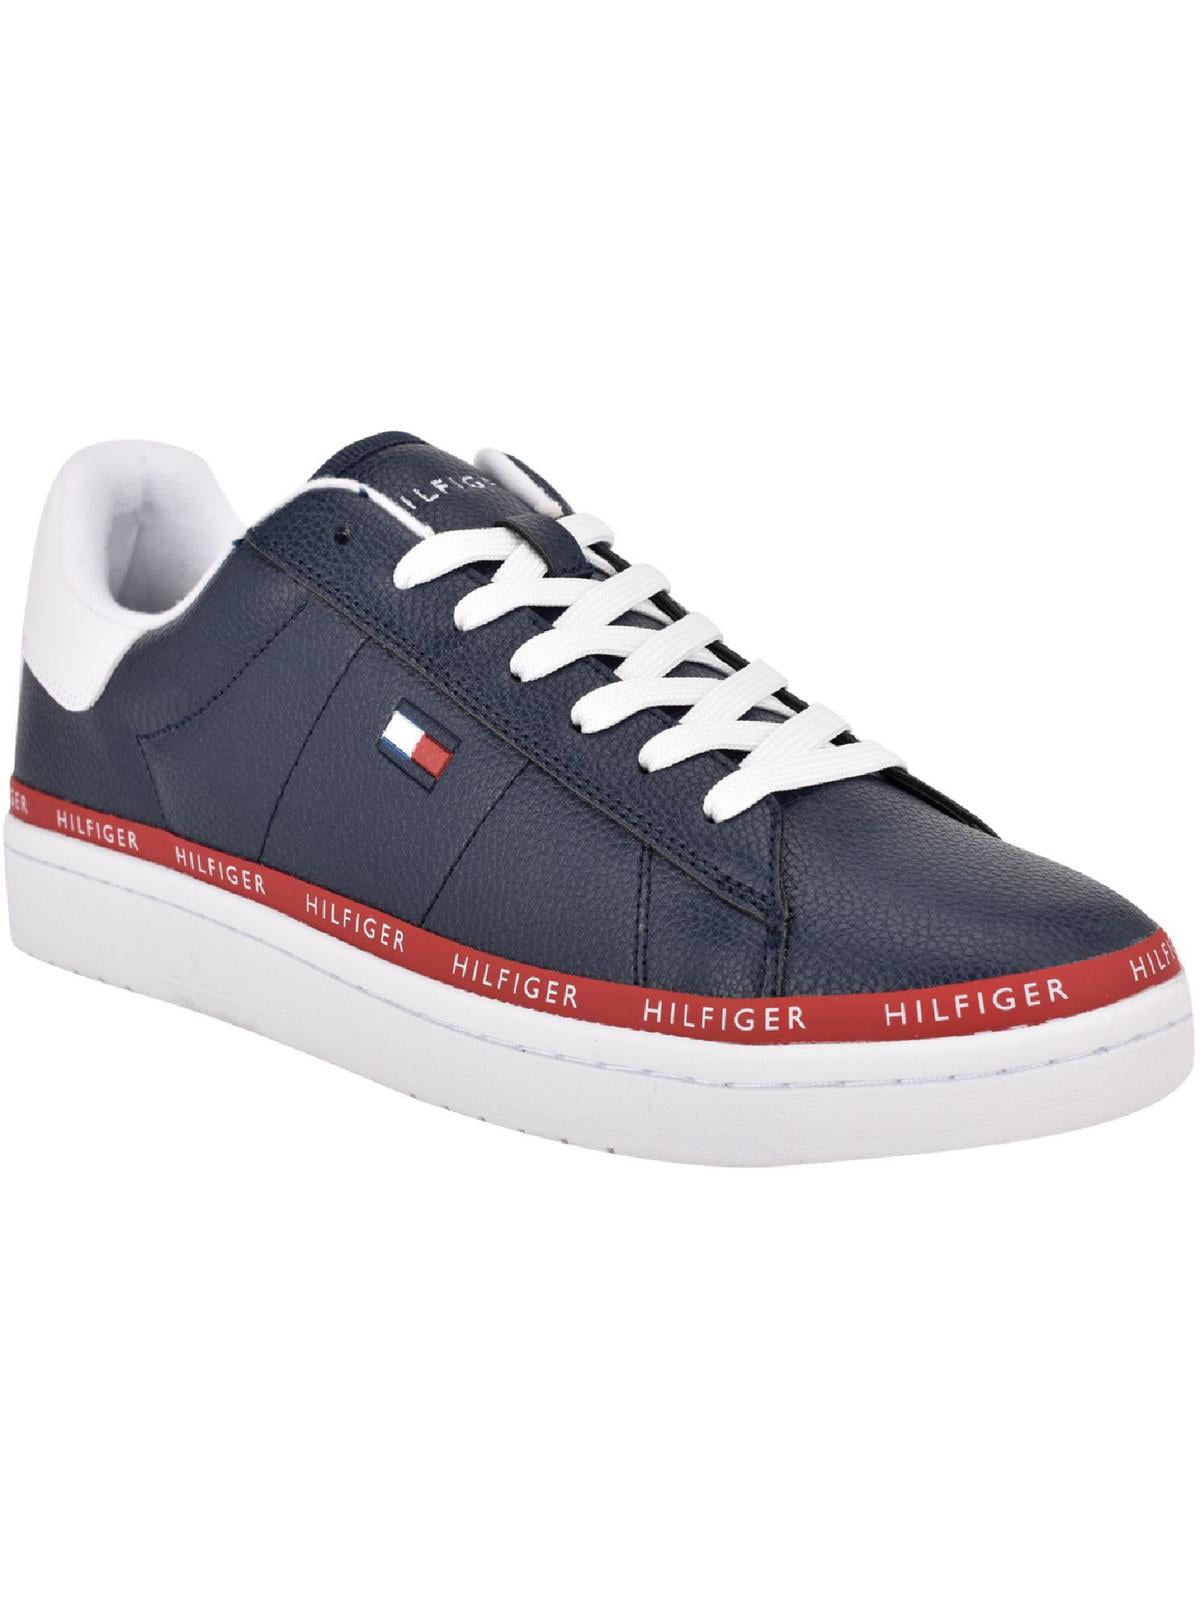 Tommy Hilfiger Mens Lewin Fitness Athletic and Training Shoes Blue 11 Medium -